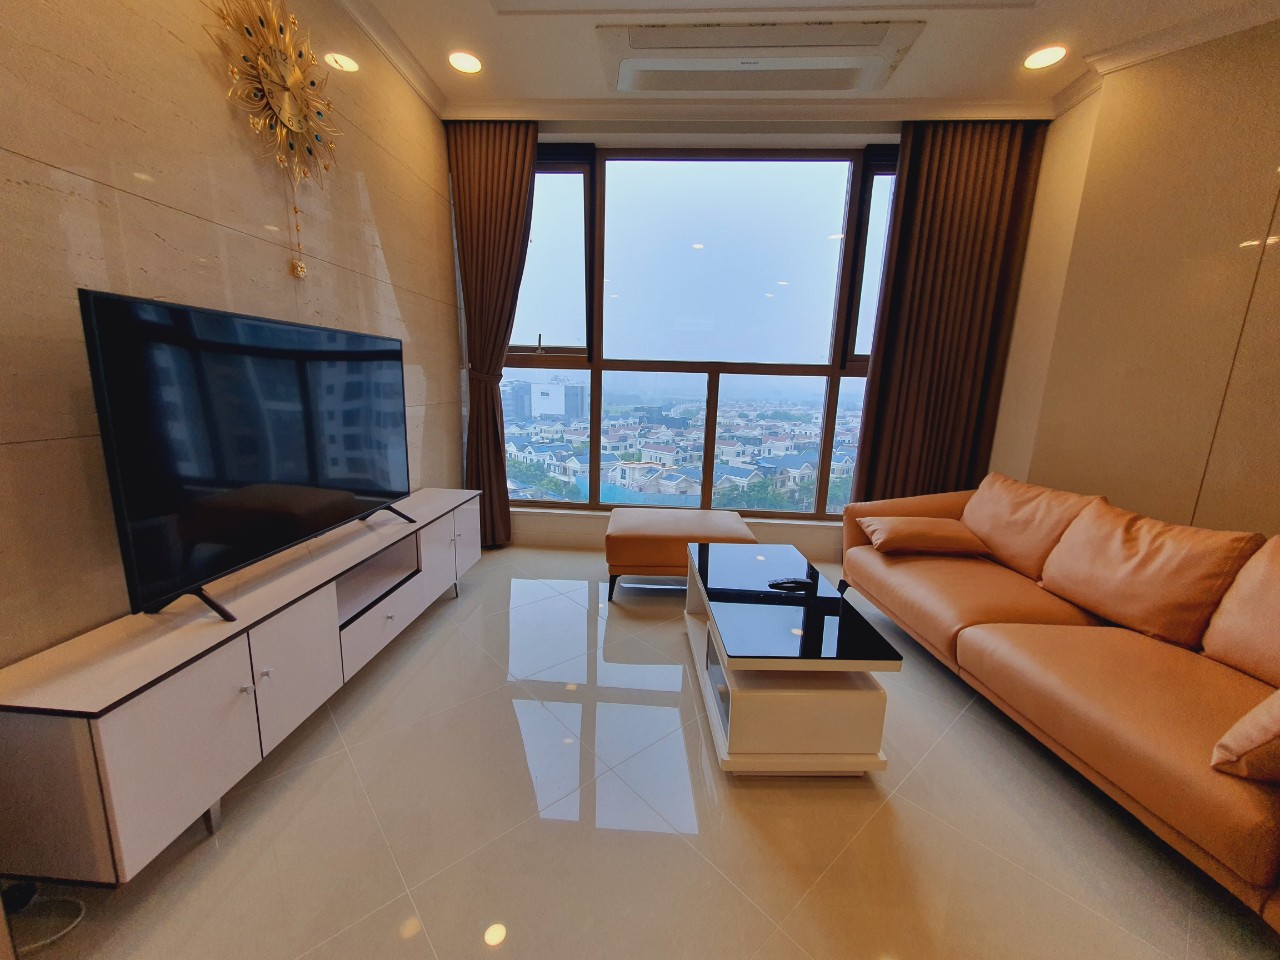 Newly furnished 3 bedroom apartment for rent in Starlake urban area